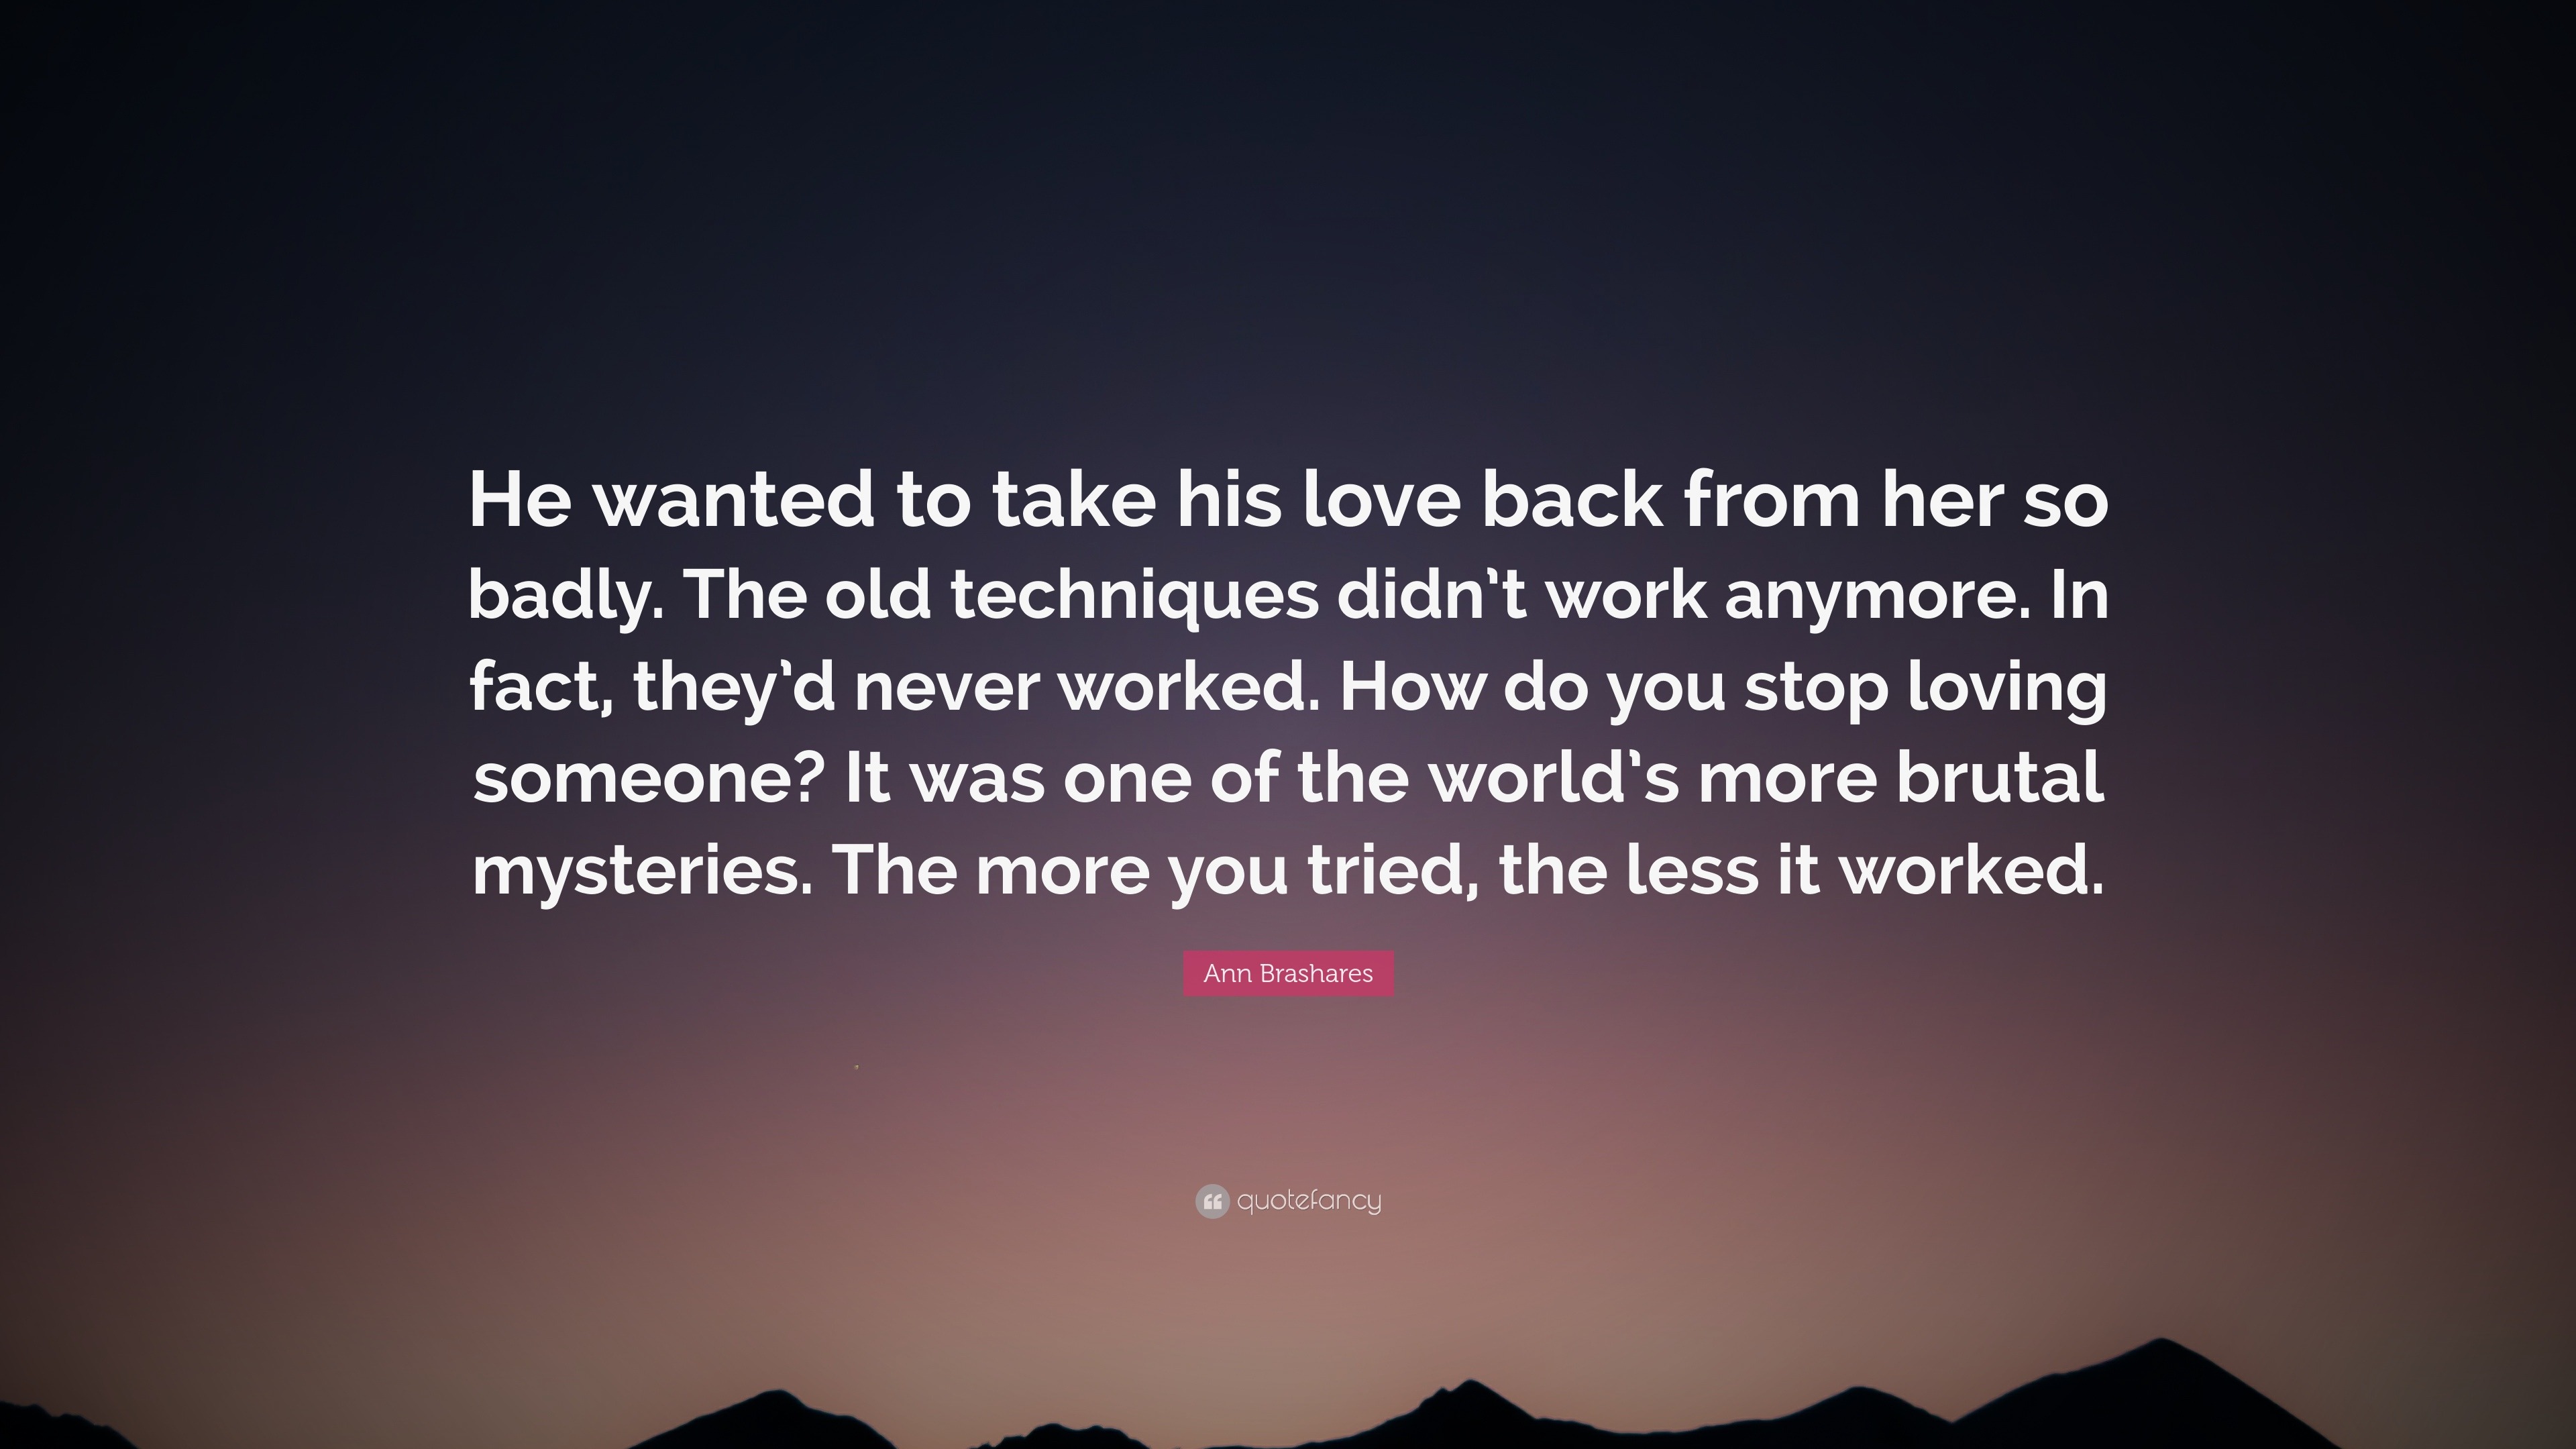 Ann Brashares Quote “He wanted to take his love back from her so badly